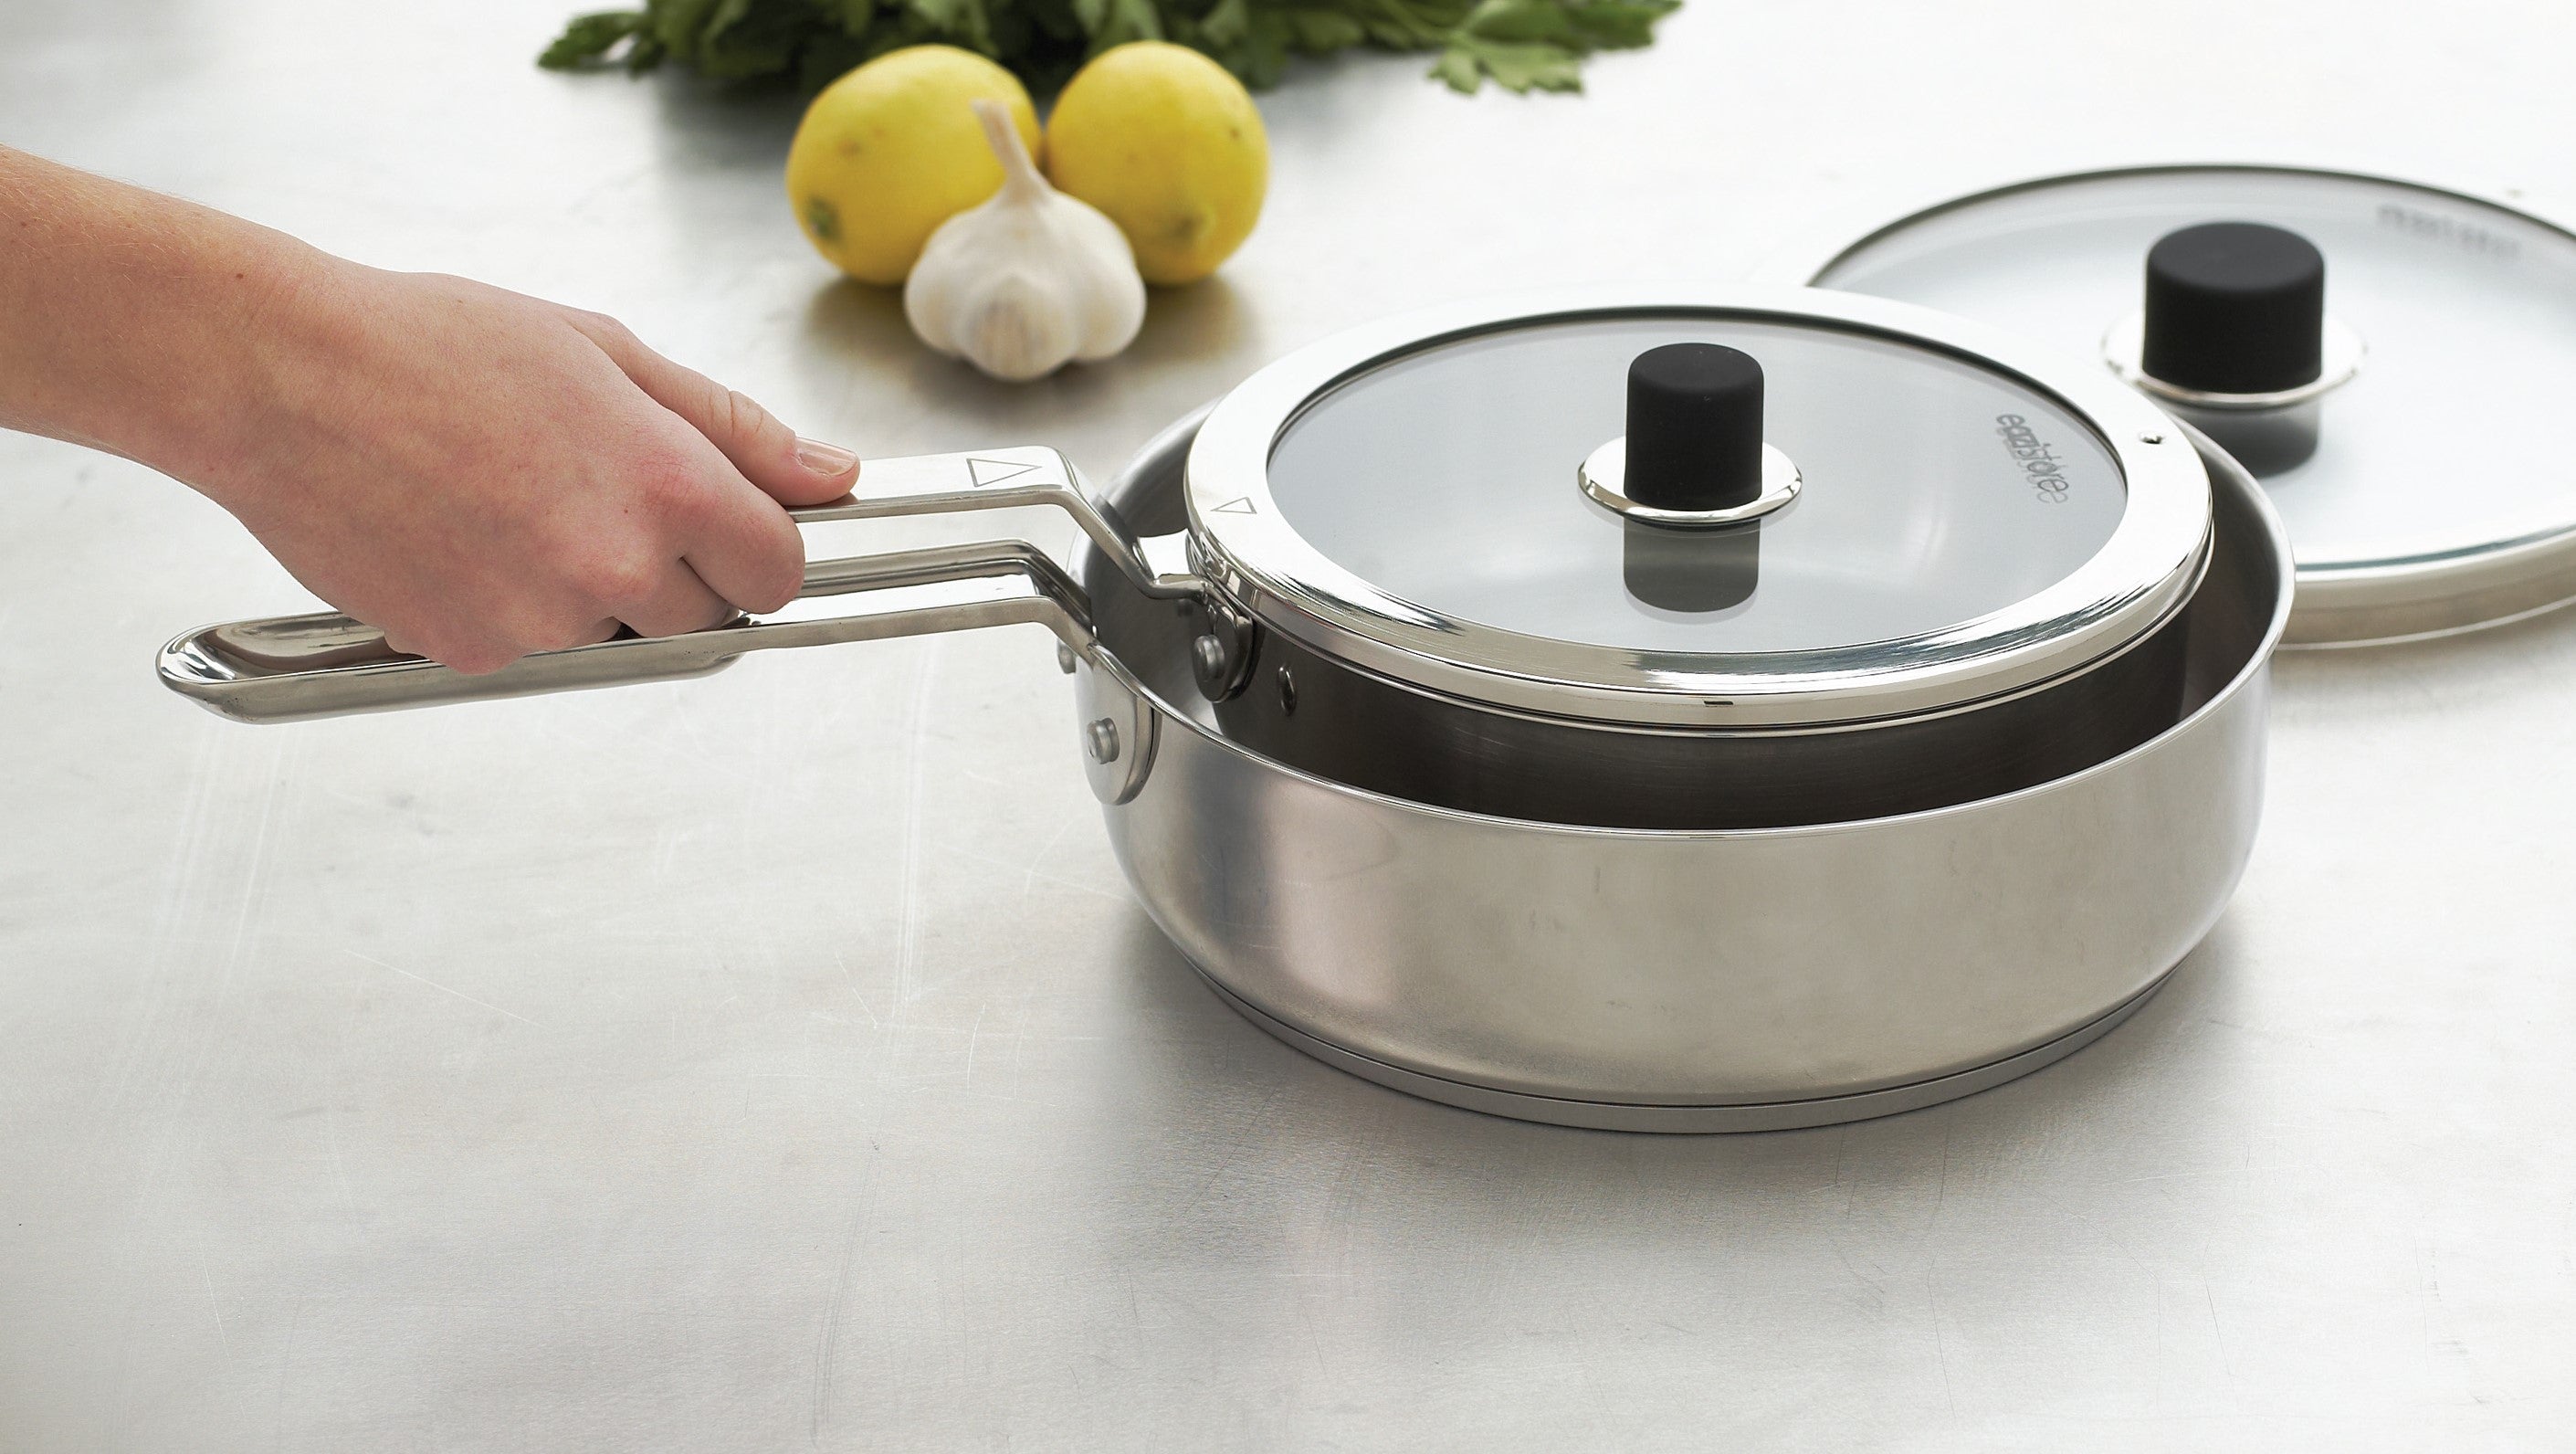 Cooking on Stainless Steel for Beginners